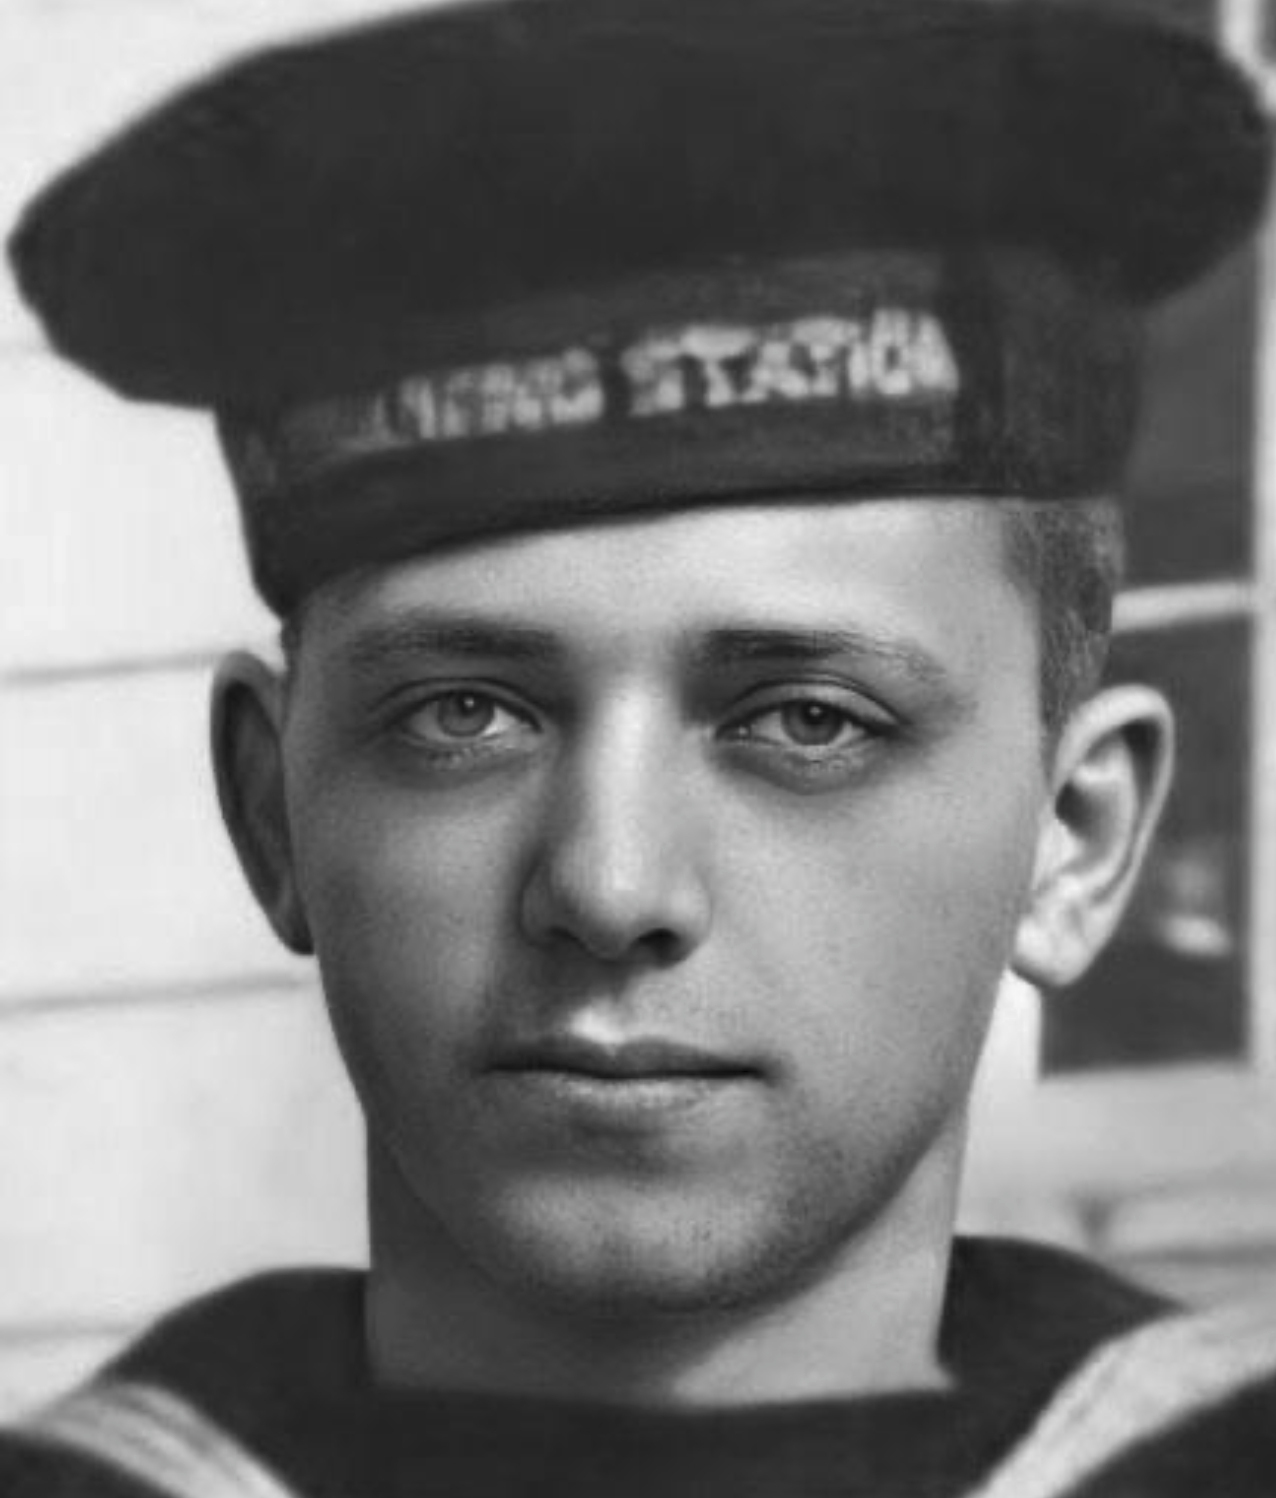 Headshot of young man in Navy uniform